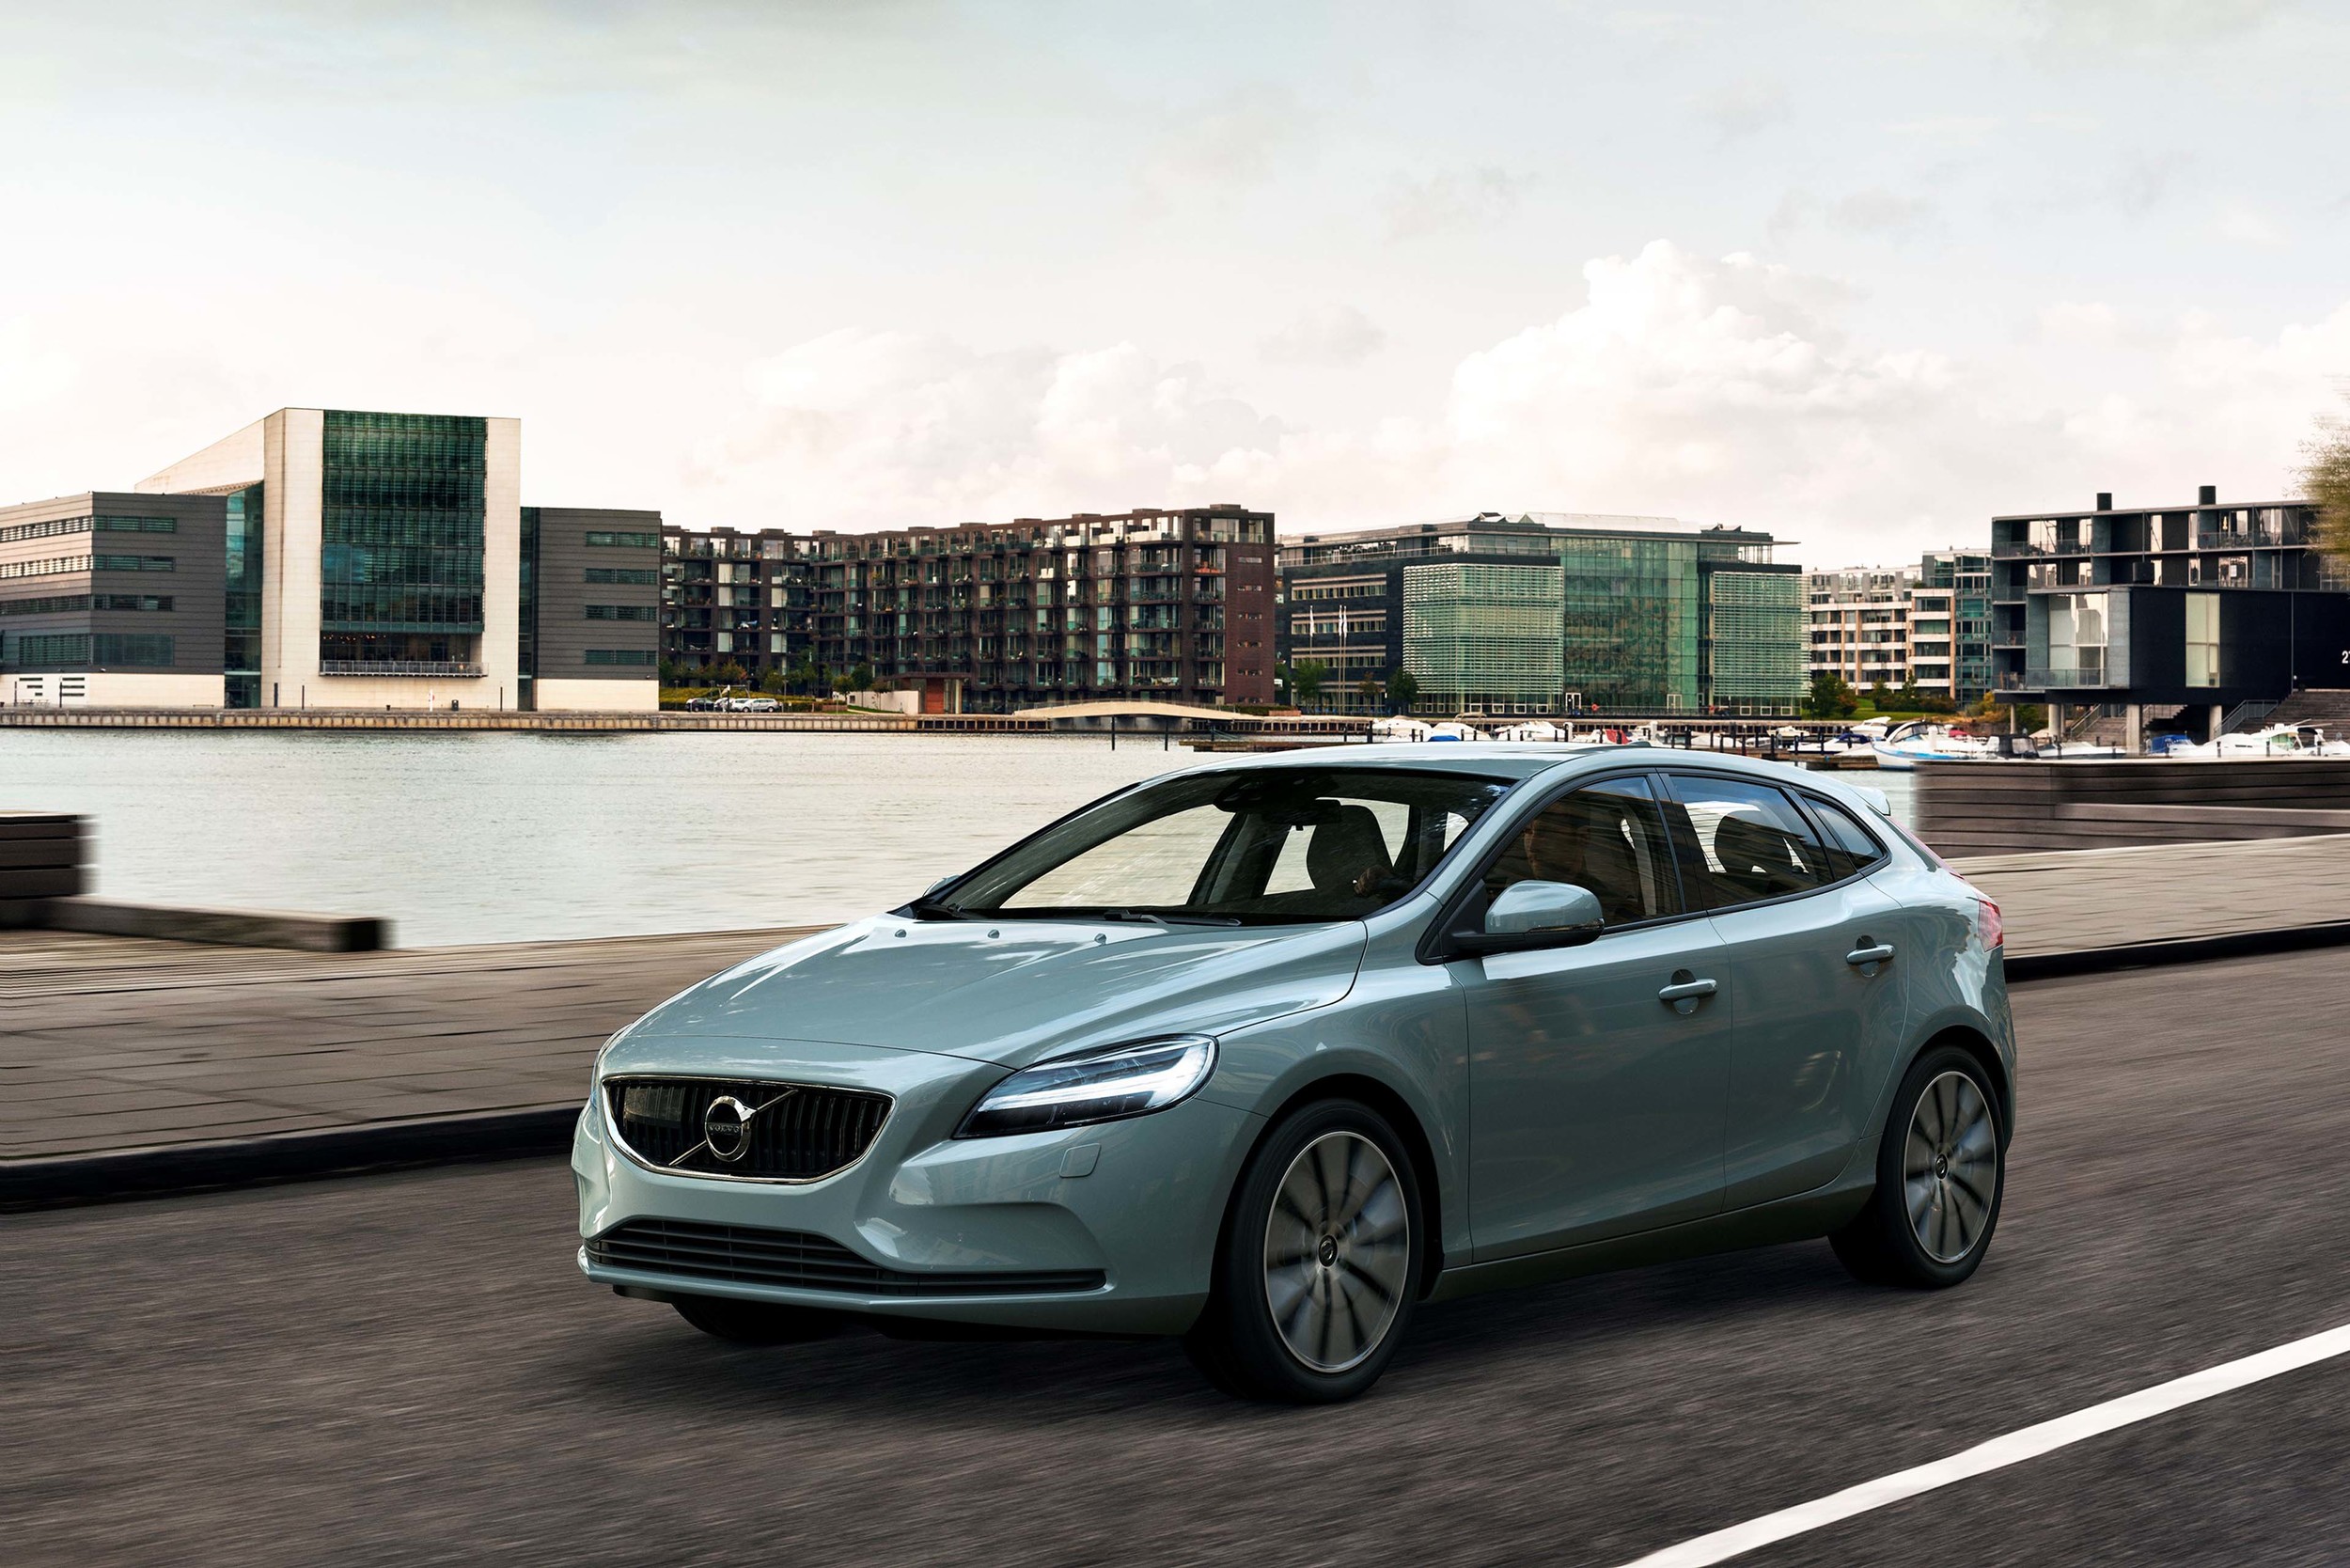 Volvo V40 Wagon: Models, Generations and Details